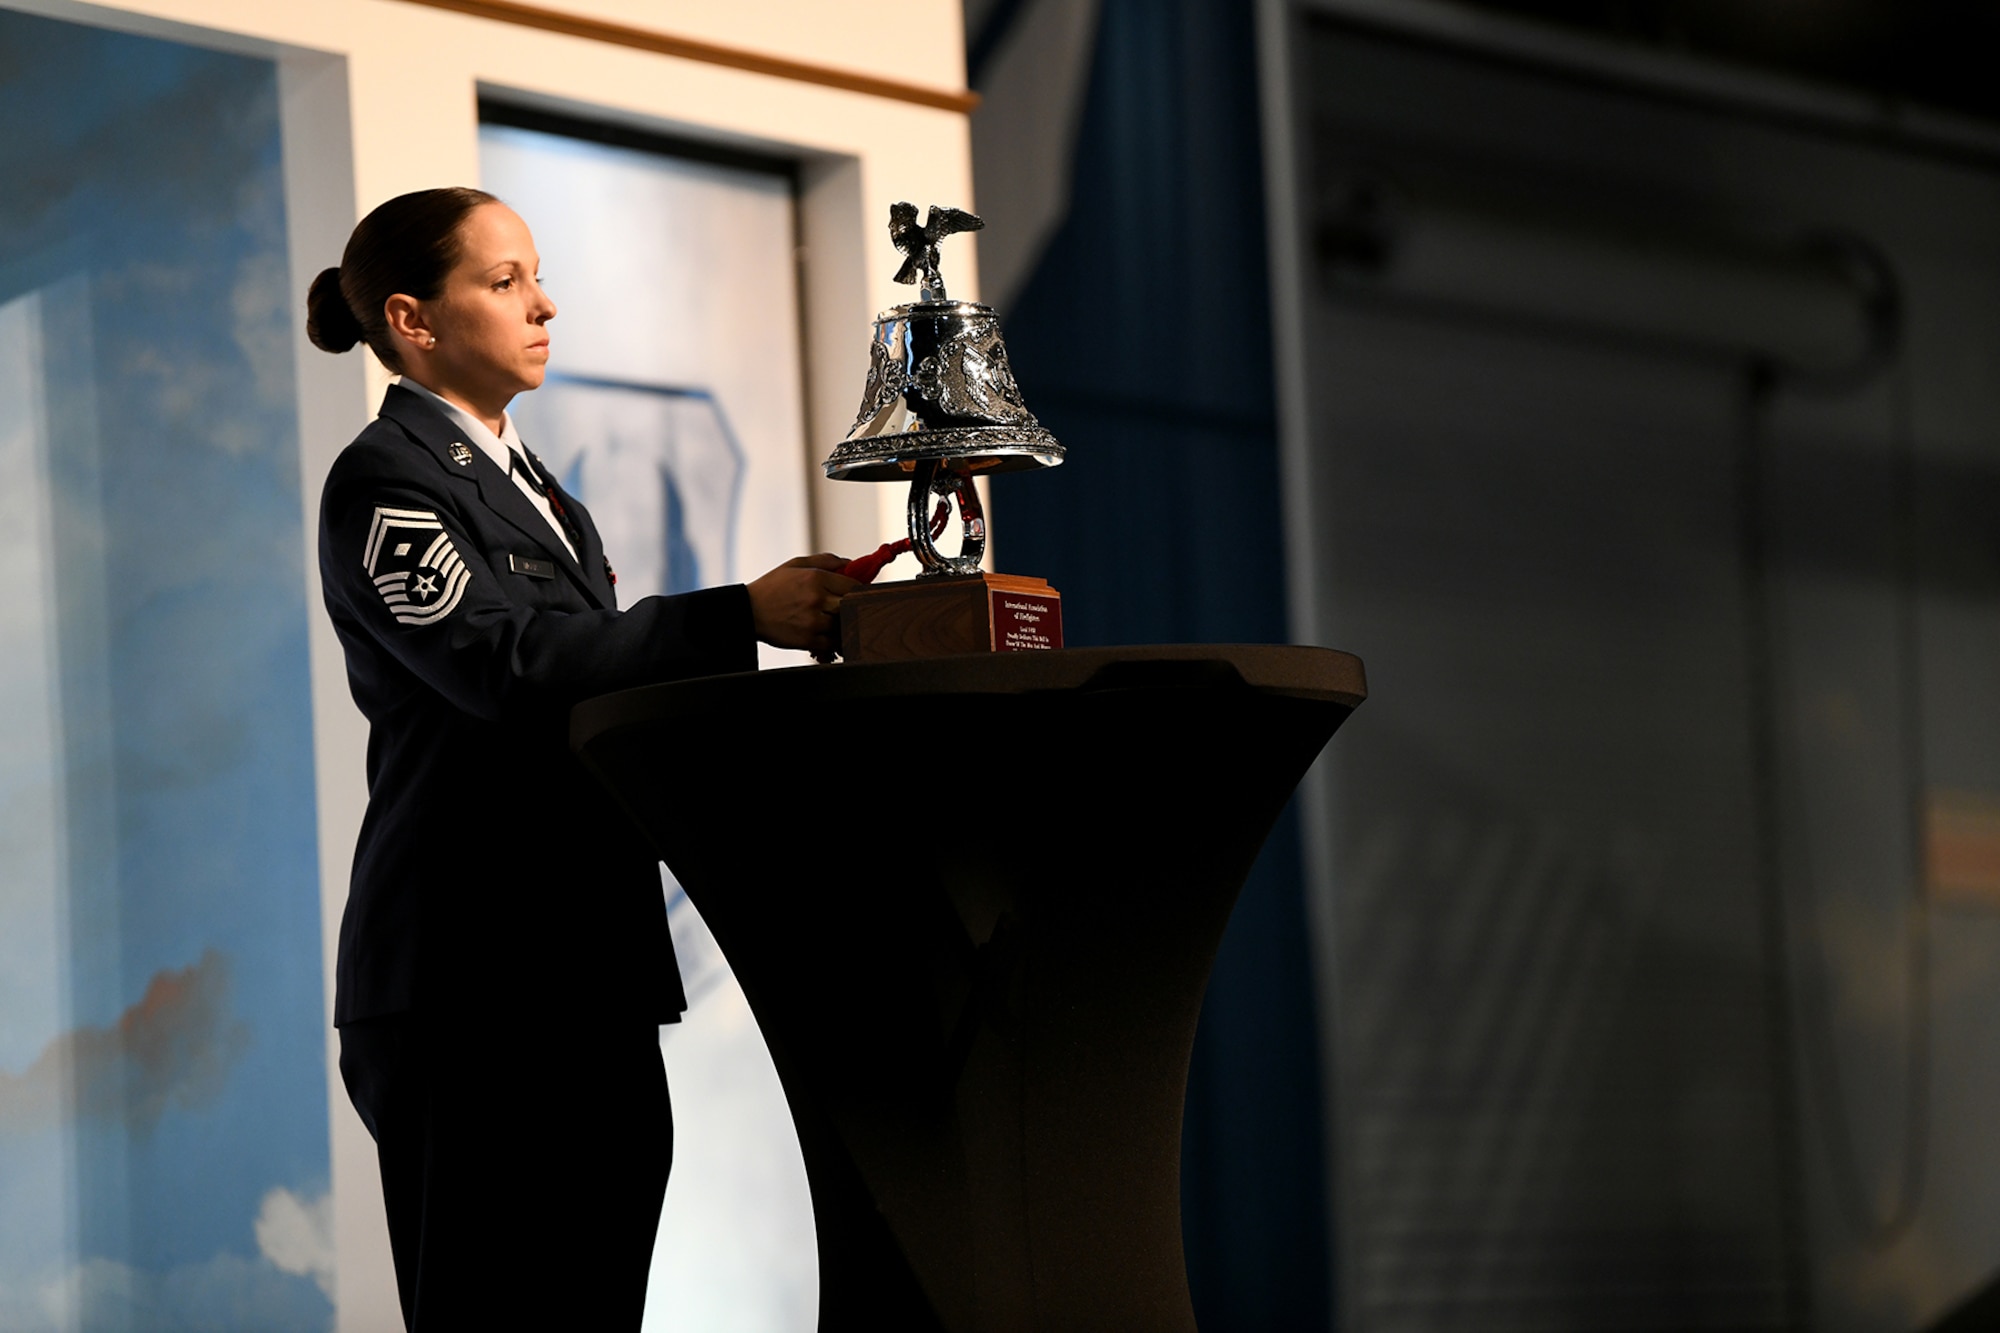 Woman in military uniform stands behind podium